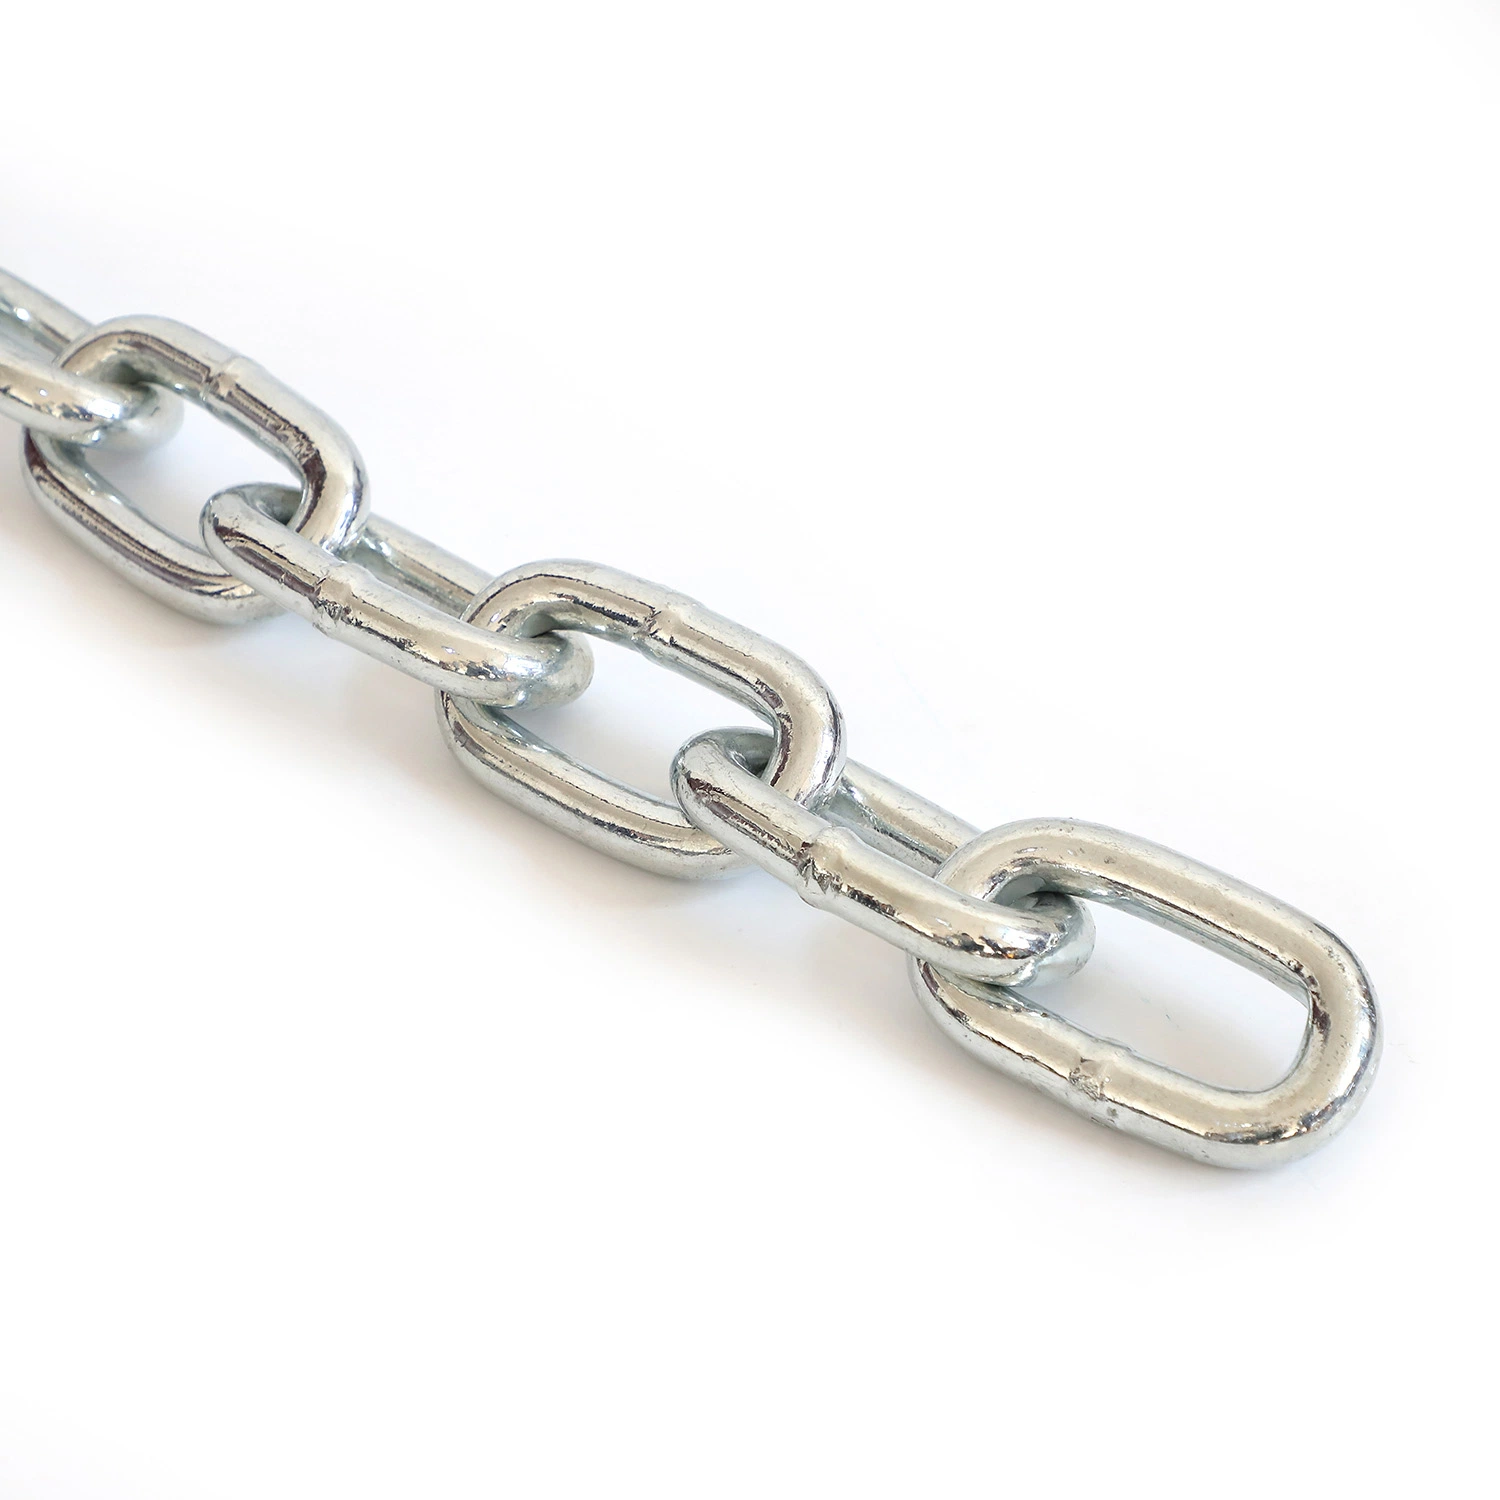 Made in China DIN766 Welded Chain Standard Short Link Lifting Chain